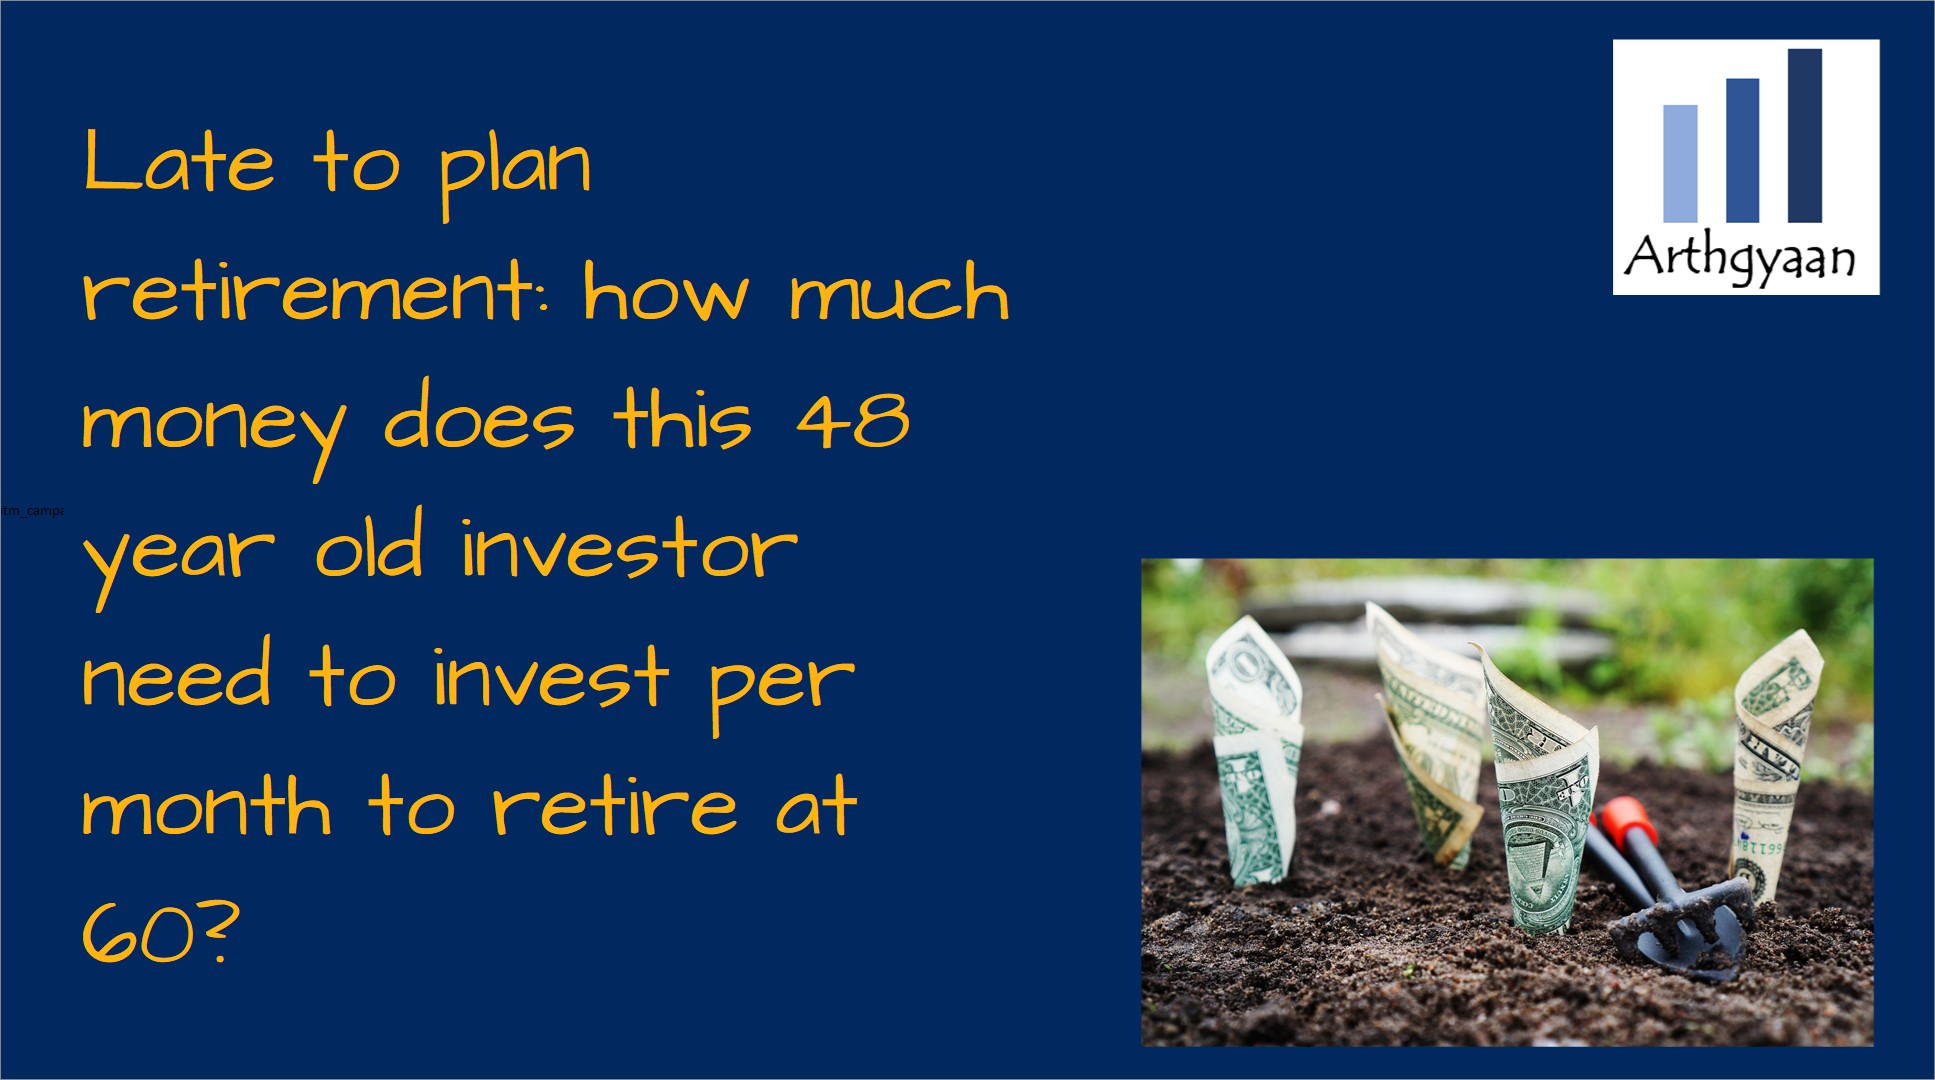 Late to plan retirement: how much money does this 48 year old investor need to invest per month to retire at 60?